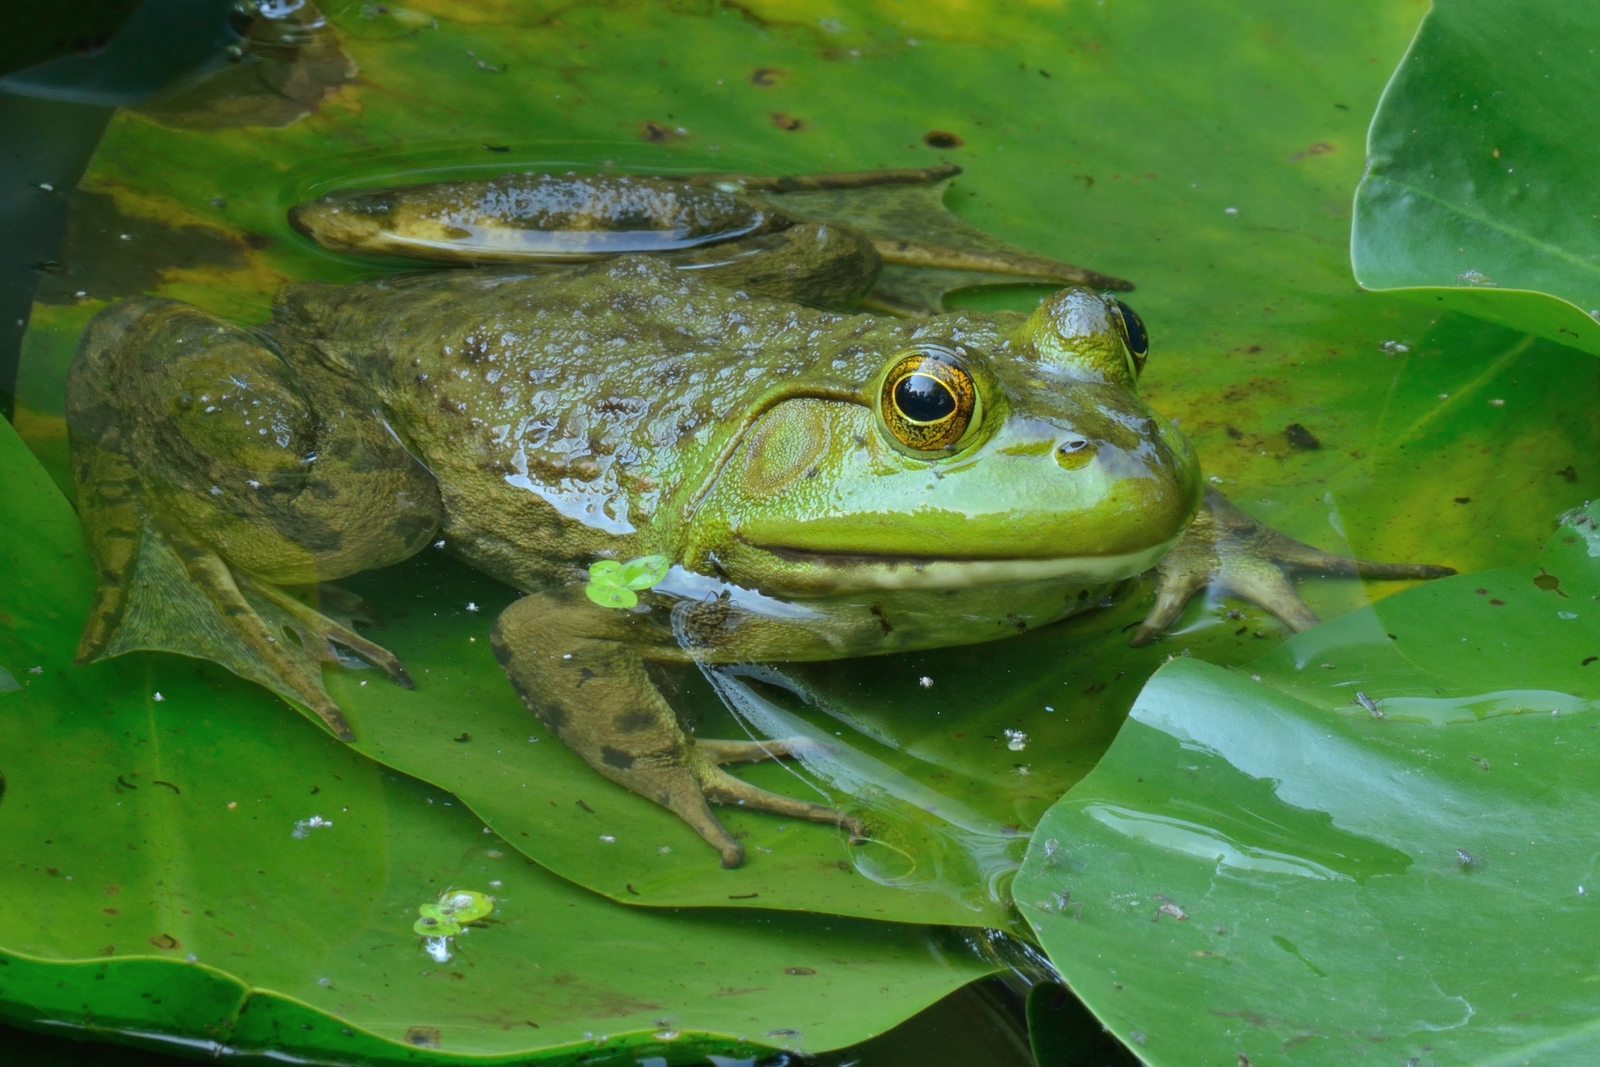 A Bullfrog pokes it's head out of the water sitting on large green leaves.